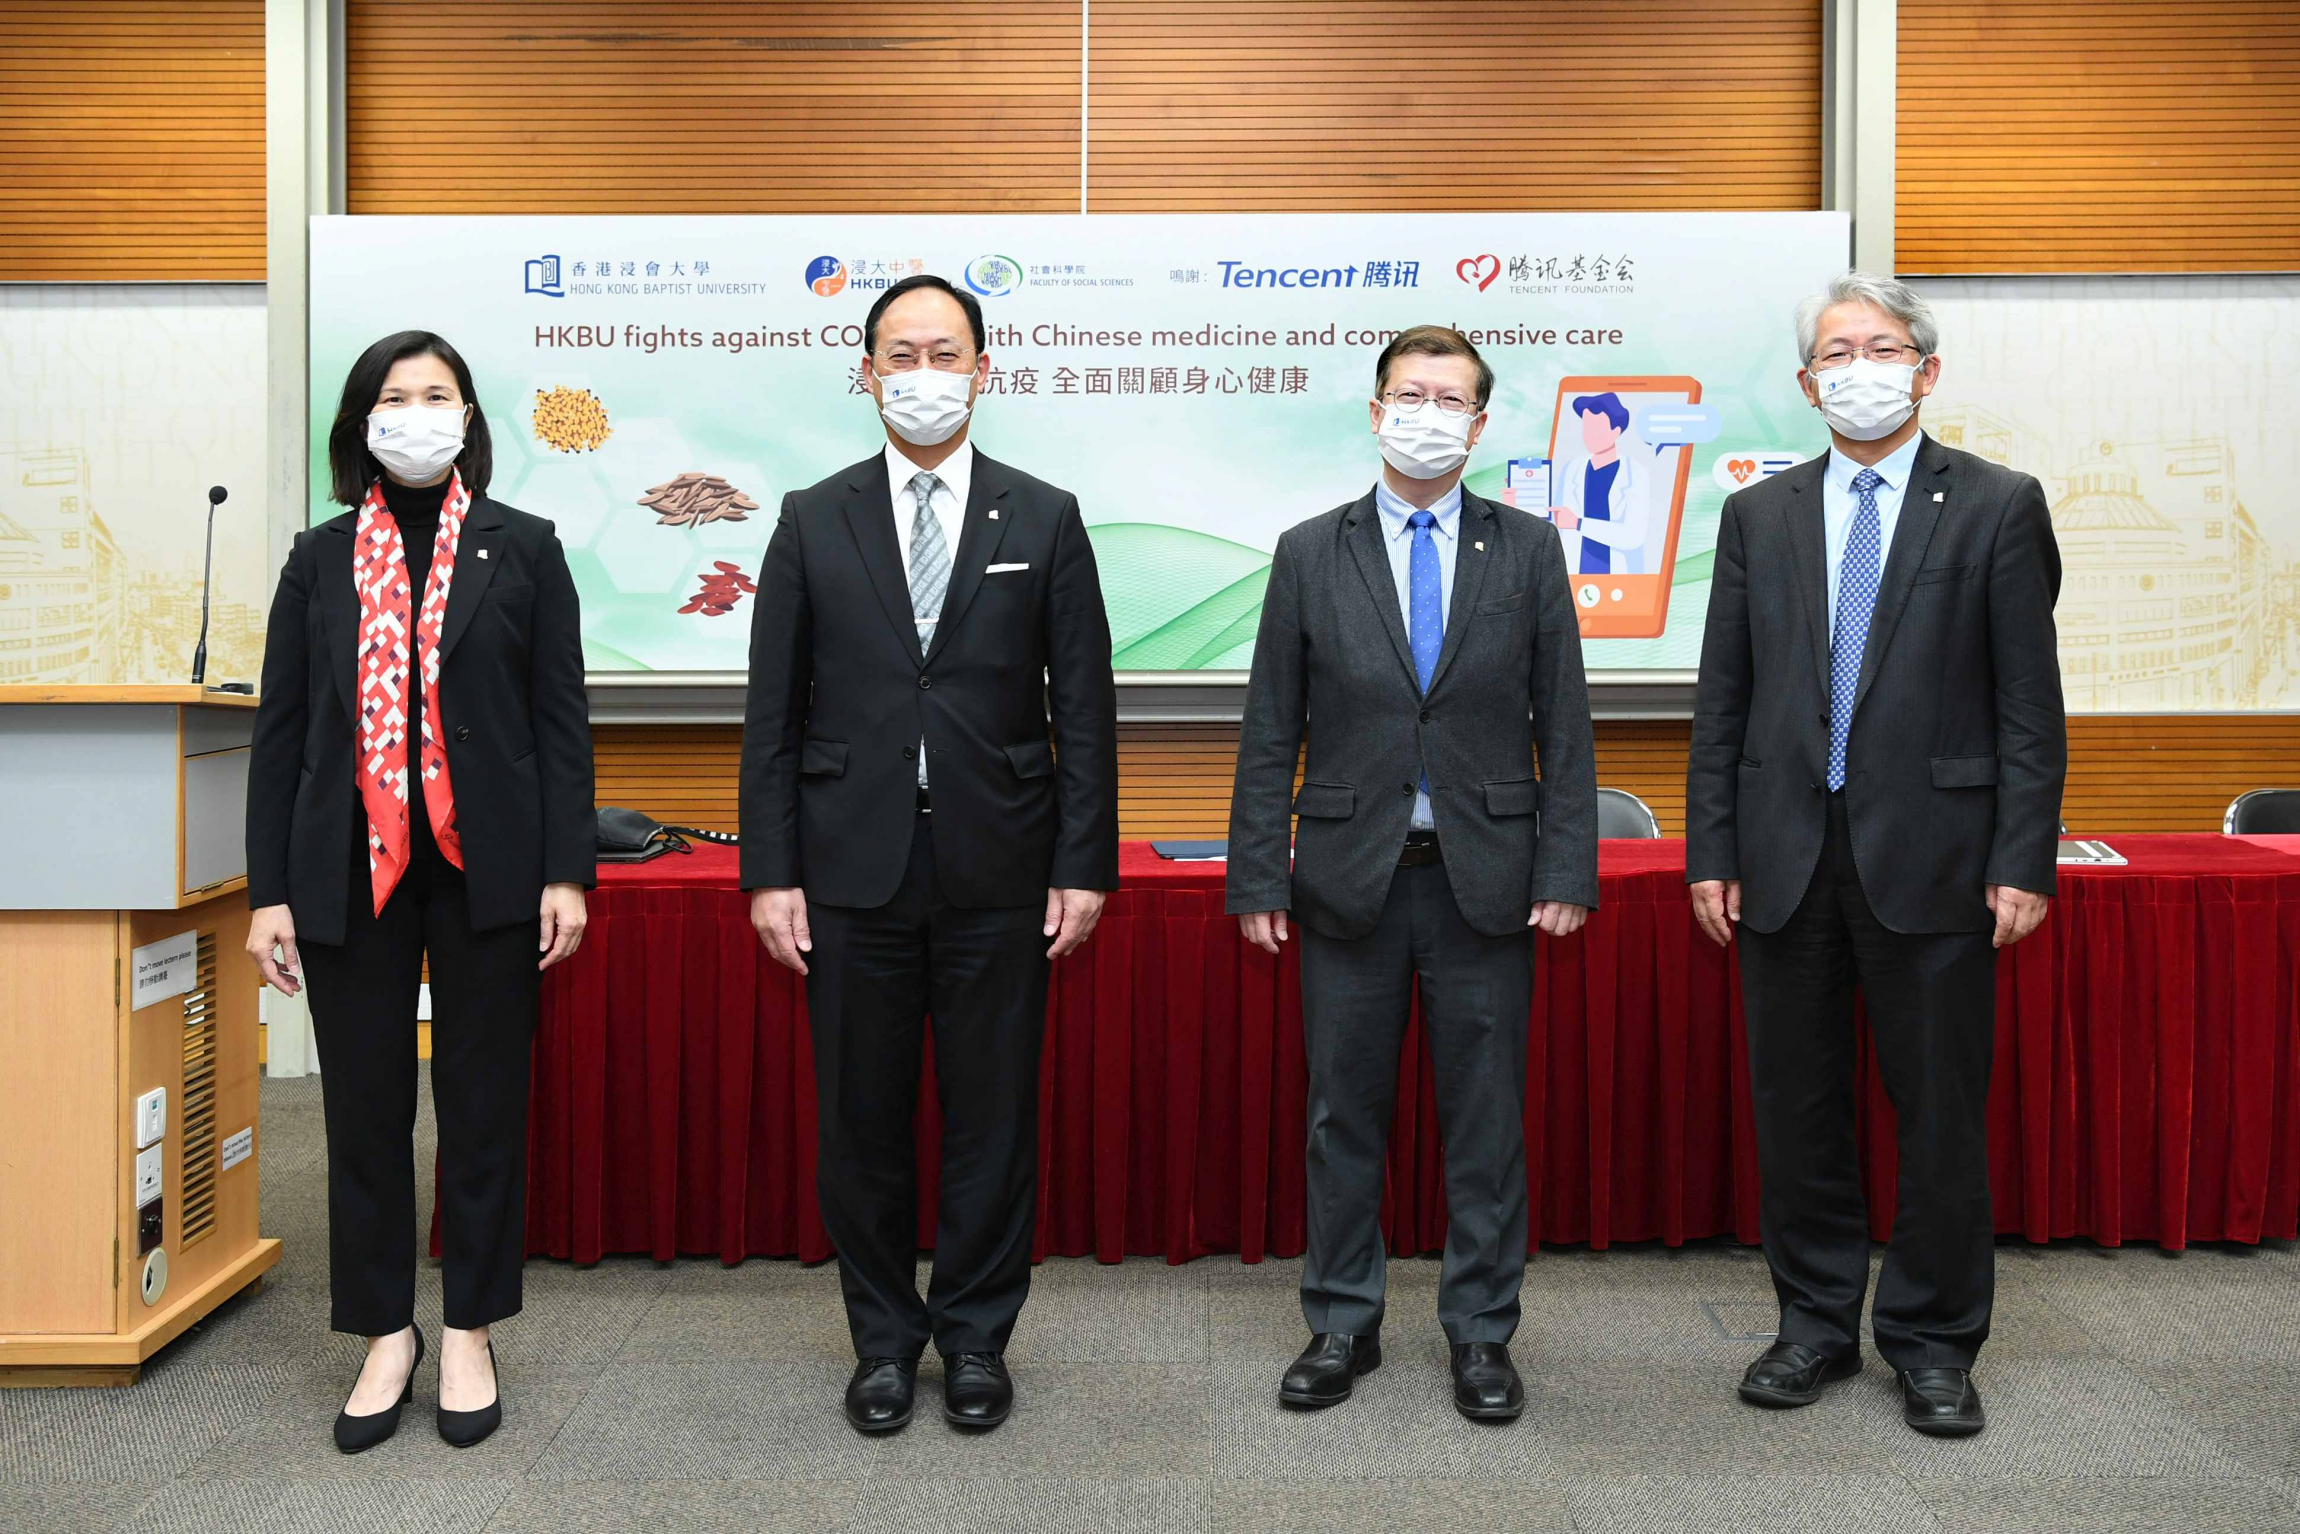 (From left) Ms Christine Chow Oi-wan, Vice-President (Administration) and Secretary; Professor Alexander Wai, President and Vice-Chancellor; Professor Daniel Lai Wing-leung, Dean of the Faculty of Social Sciences; and Professor Bian Zhaoxiang, Associate Vice-President (Chinese Medicine Development) of HKBU introduce the services provided by the University for COVID patients, their close contacts and carers.